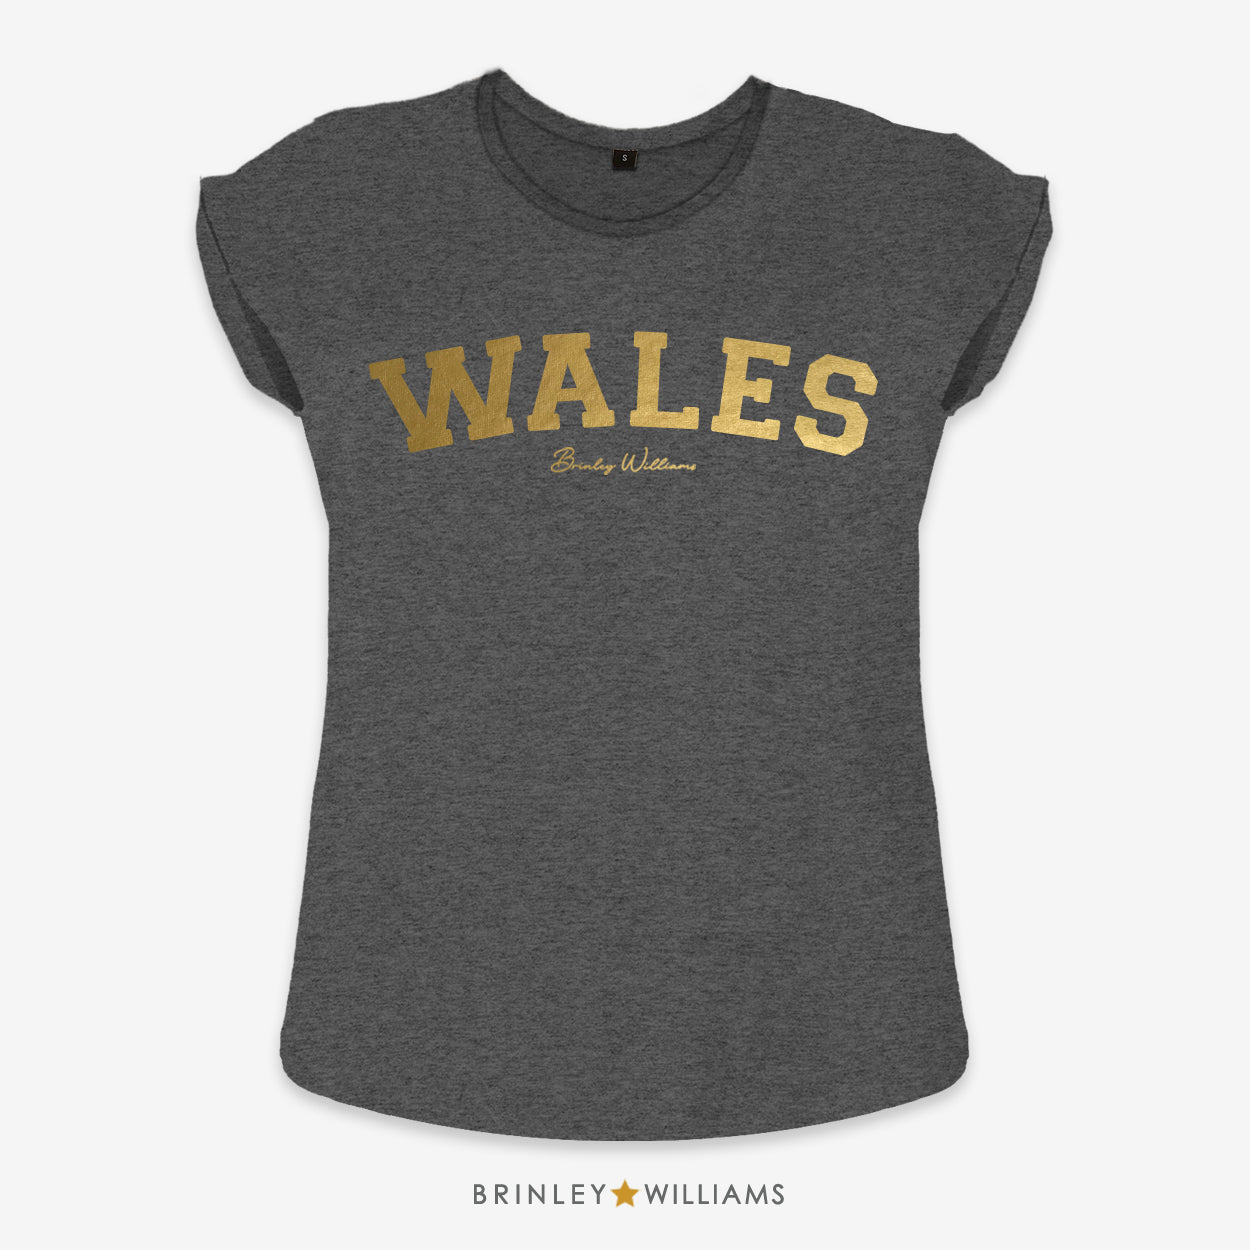 Wales Rolled Sleeve T-shirt - Charcoal